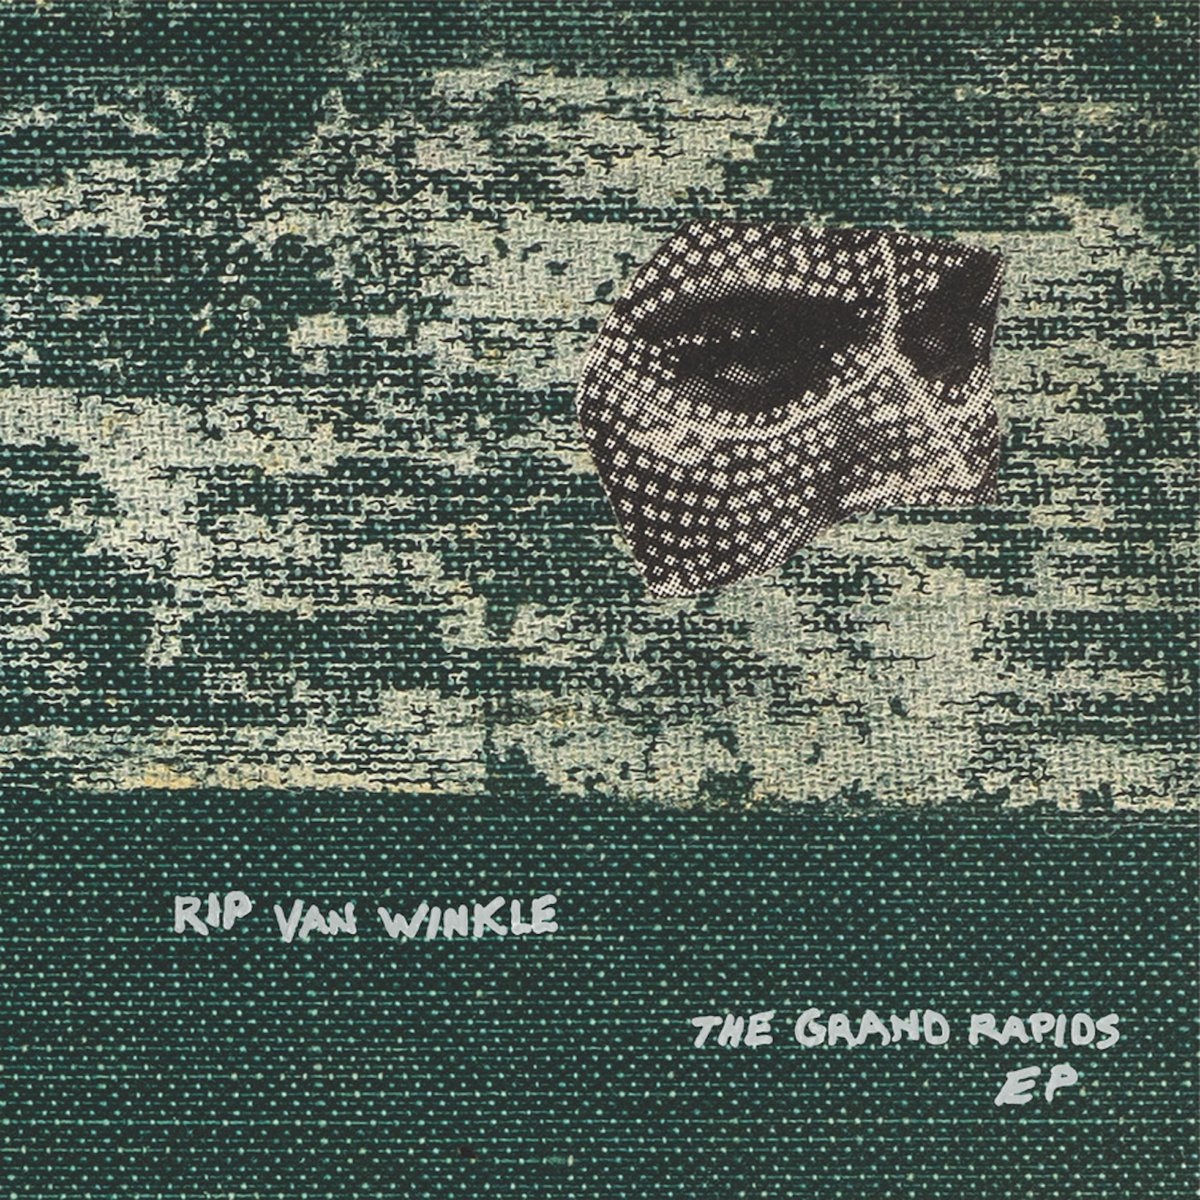 RIP VAN WINKLE - THE GRAND RAPIDS EP OUT FRI FEB 23 A brand new collection of songs from Robert Pollard and the members of Joseph Airport. Pre-save at the link below! orcd.co/rrz4dq6